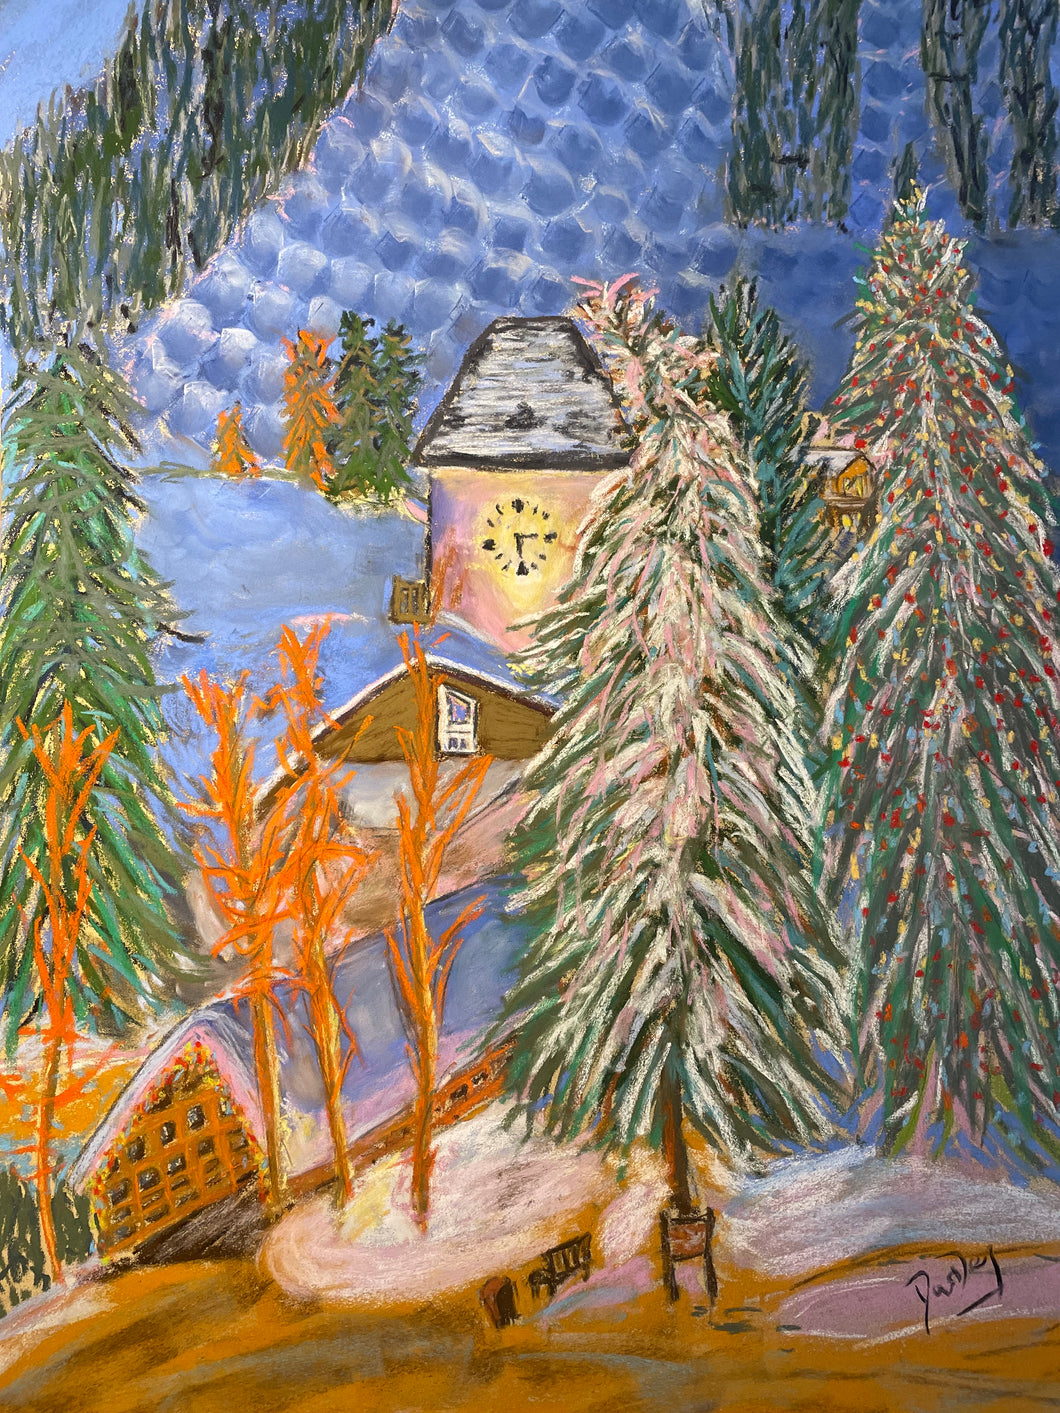 Vail Village Clock and Wooden Bridge with Christmas Lights